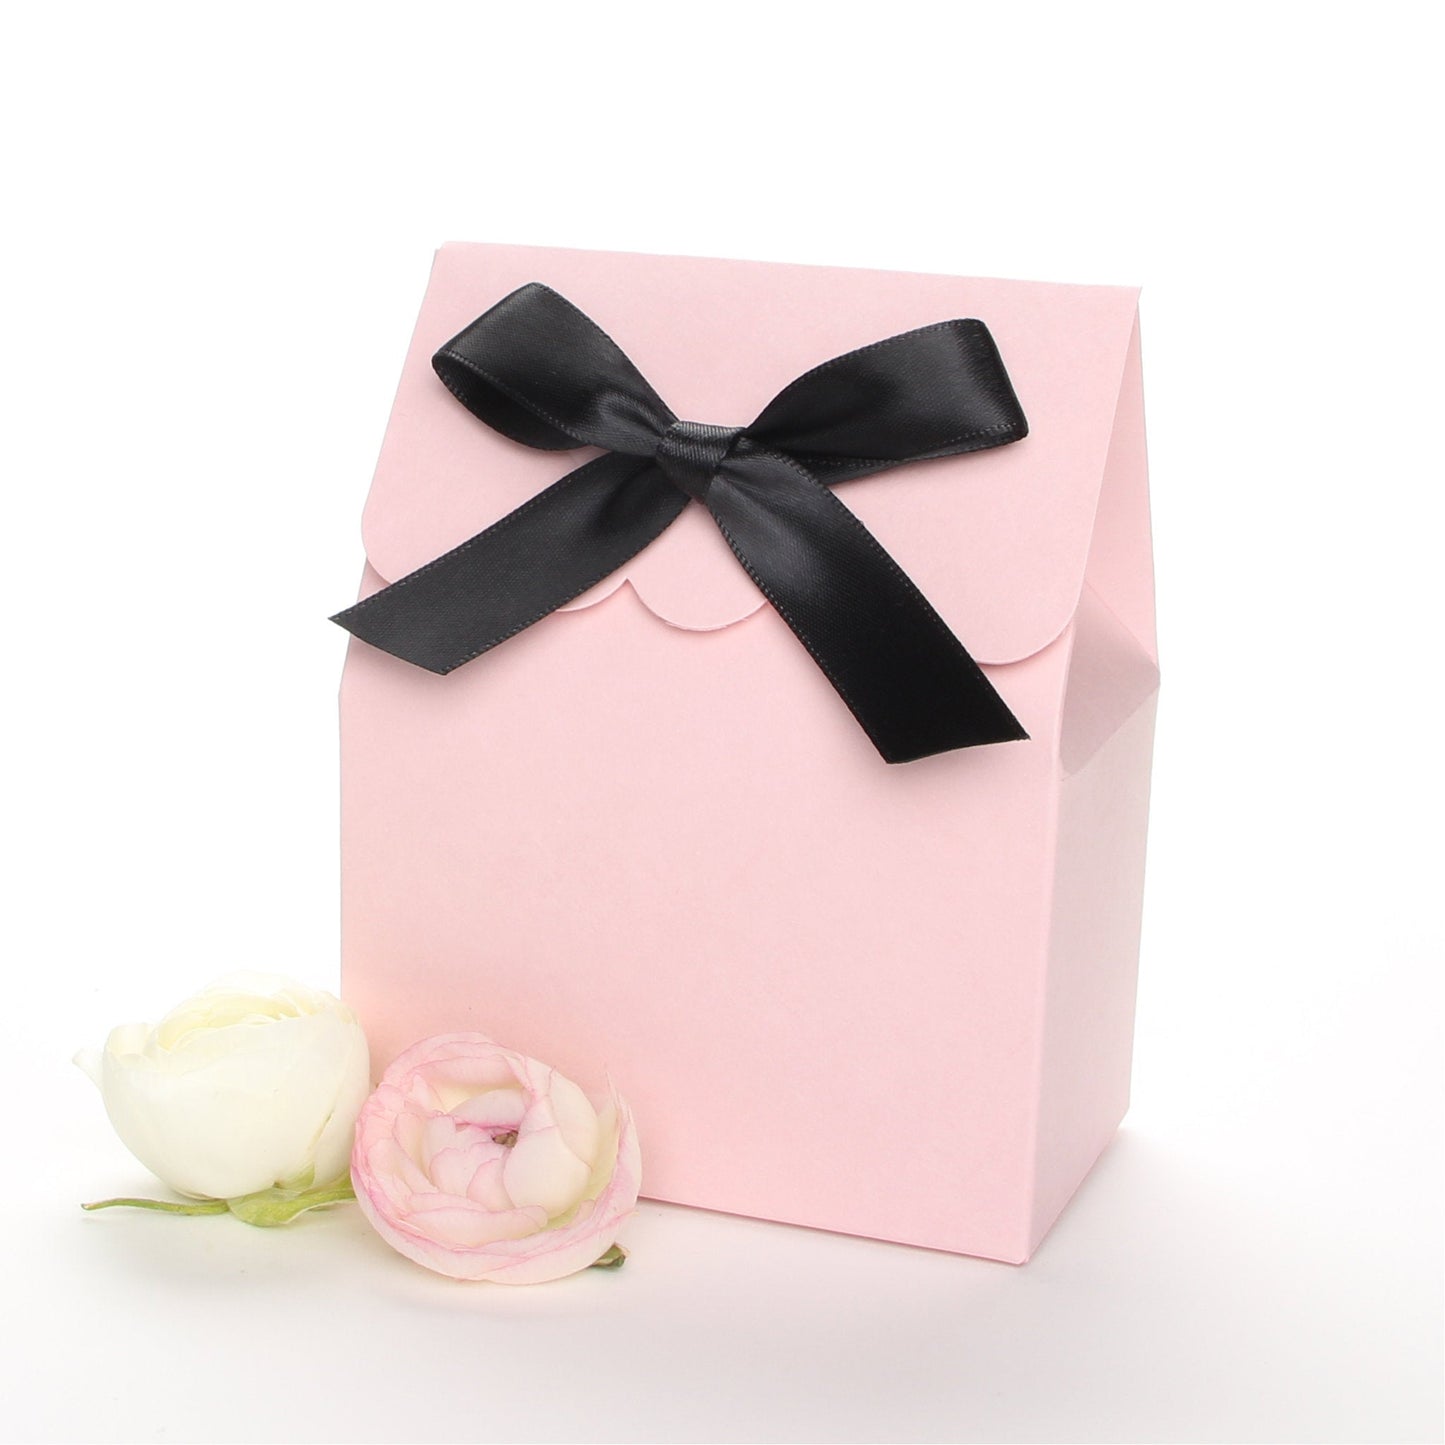 Lux Party’s pink favor box with a scalloped edge and a black satin bow next to pink and white ranunculus flowers.